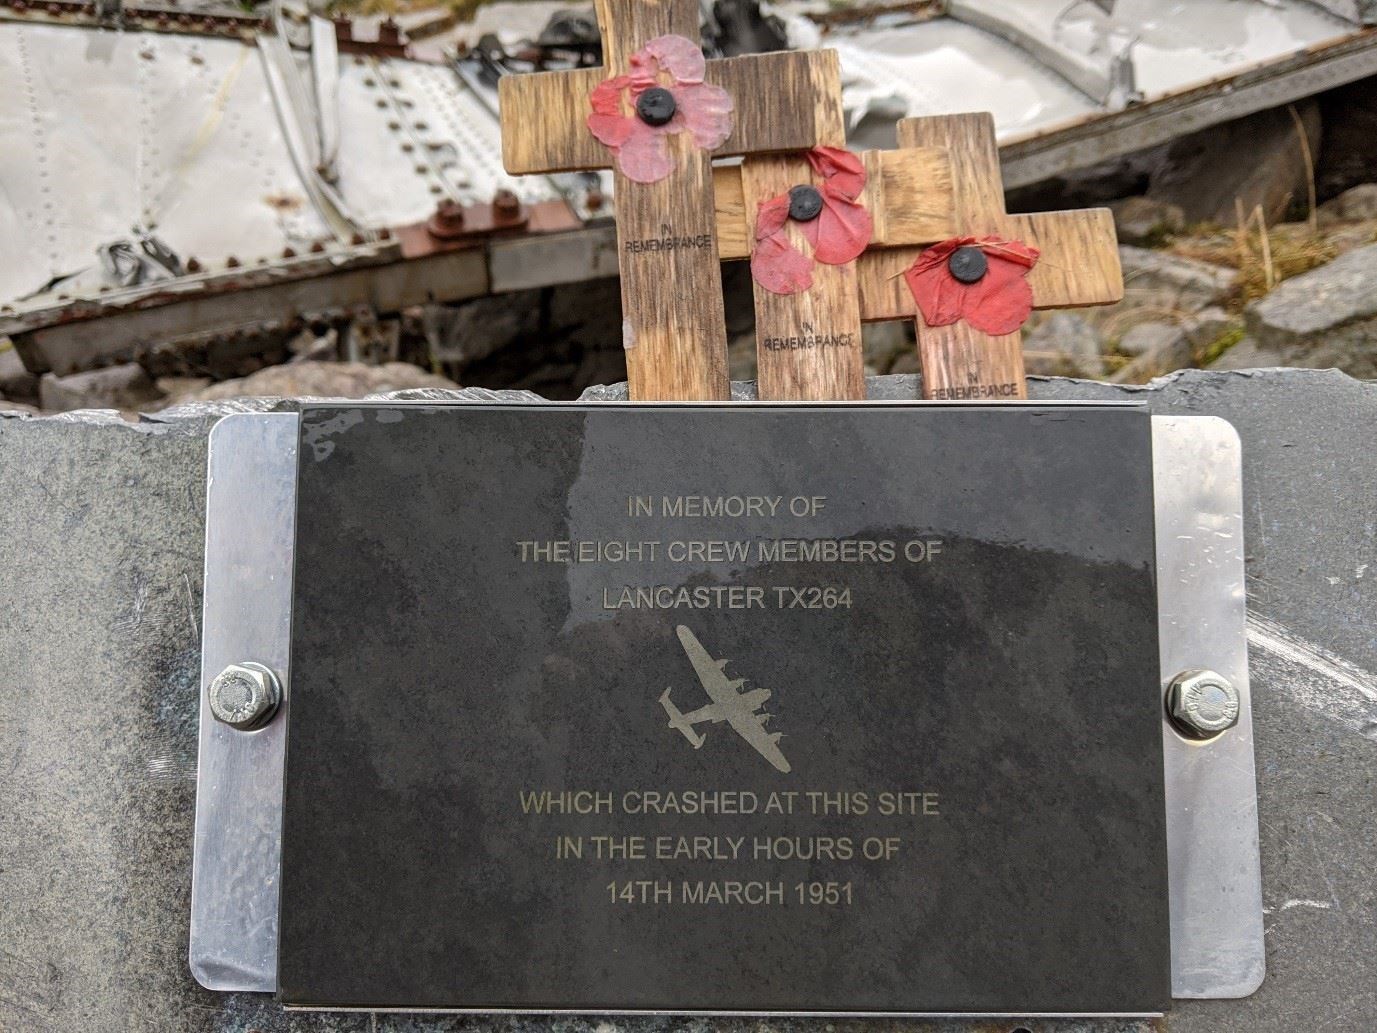 A plaque laid in honour of the crewman of the Lancaster bomber who died in the crash.